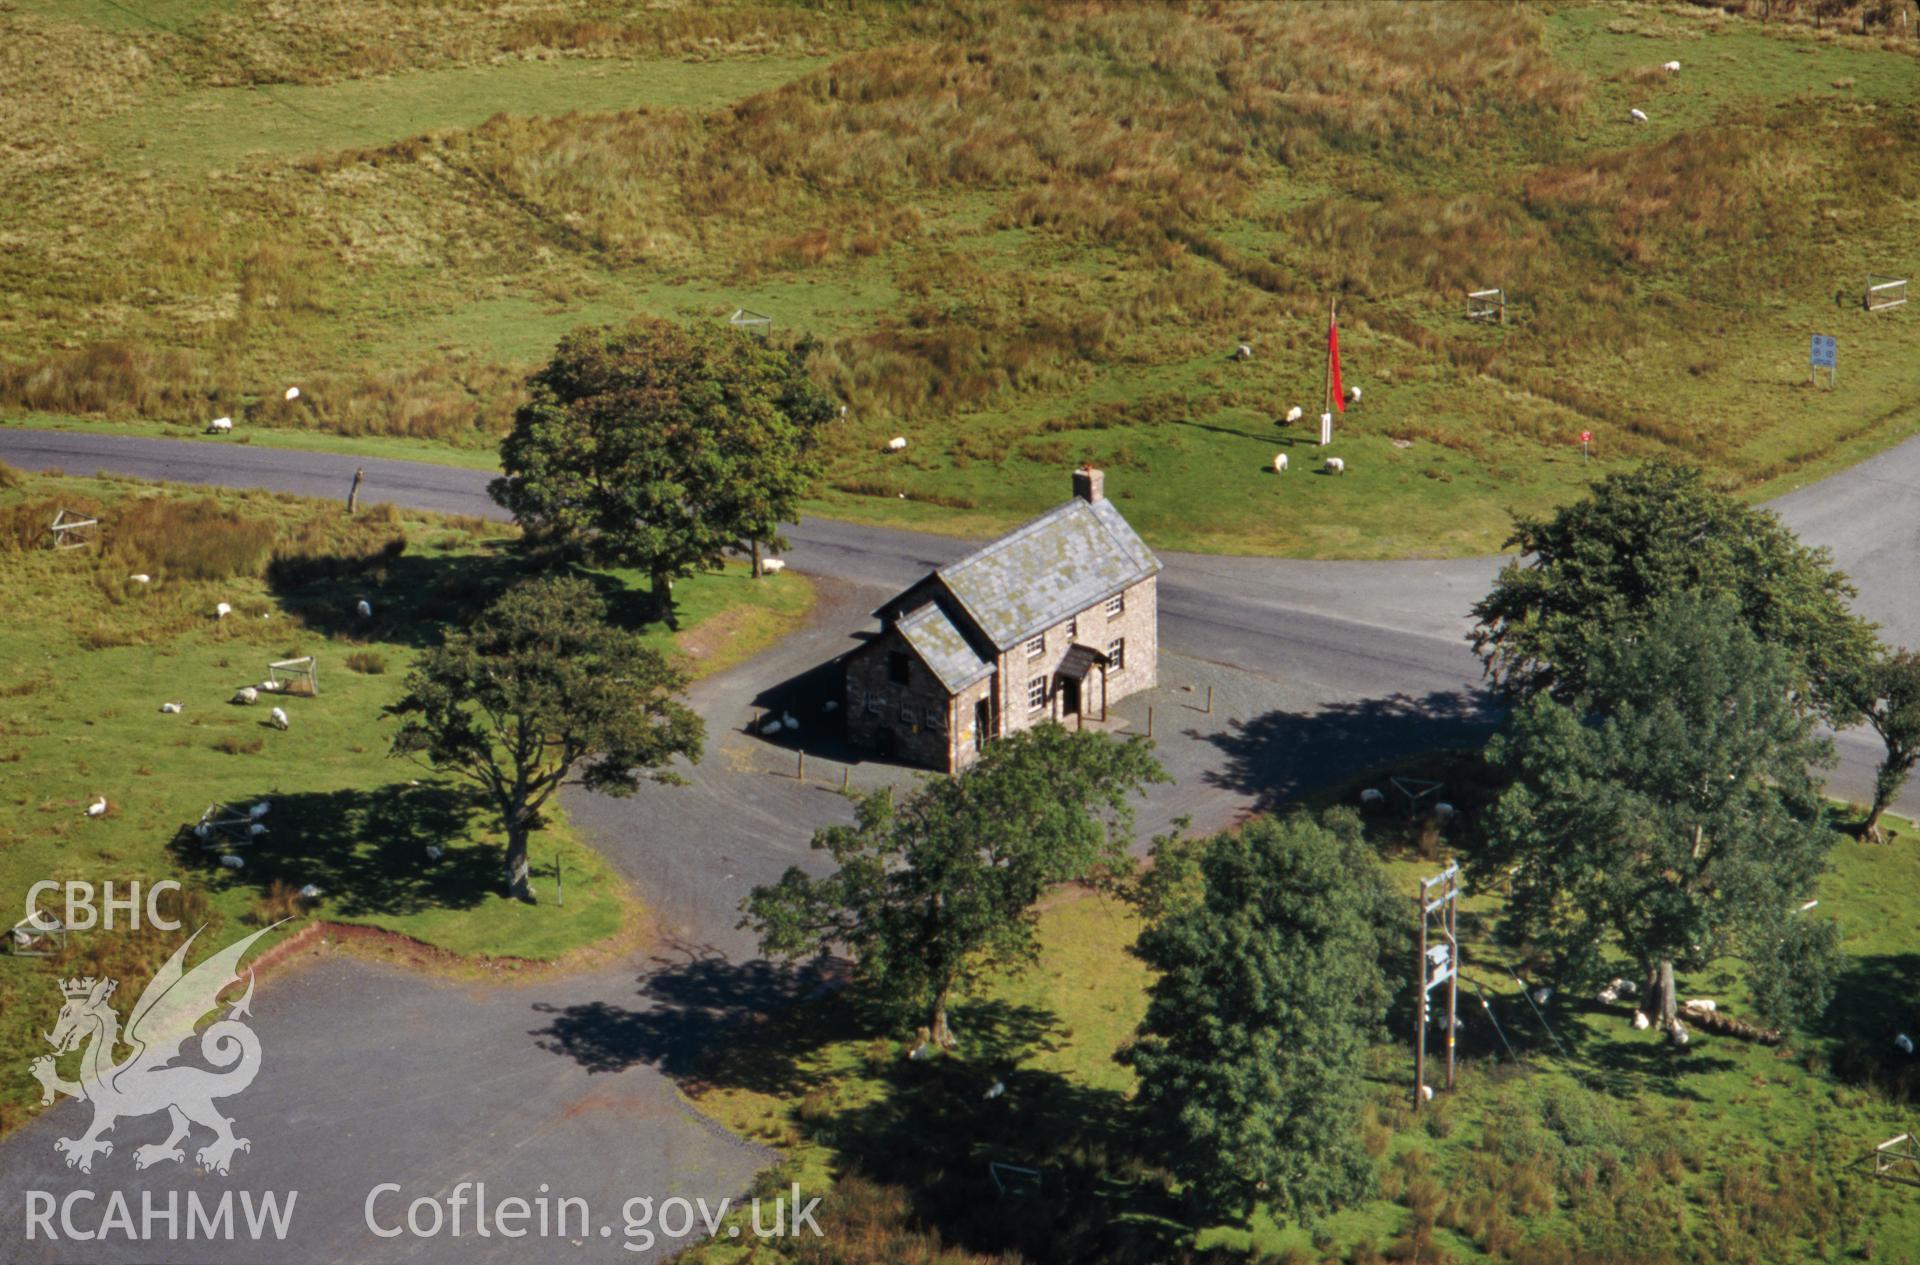 RCAHMW colour slide oblique aerial photograph of Drovers's Arms, Duhonw, taken on 27/08/1998 by Toby Driver